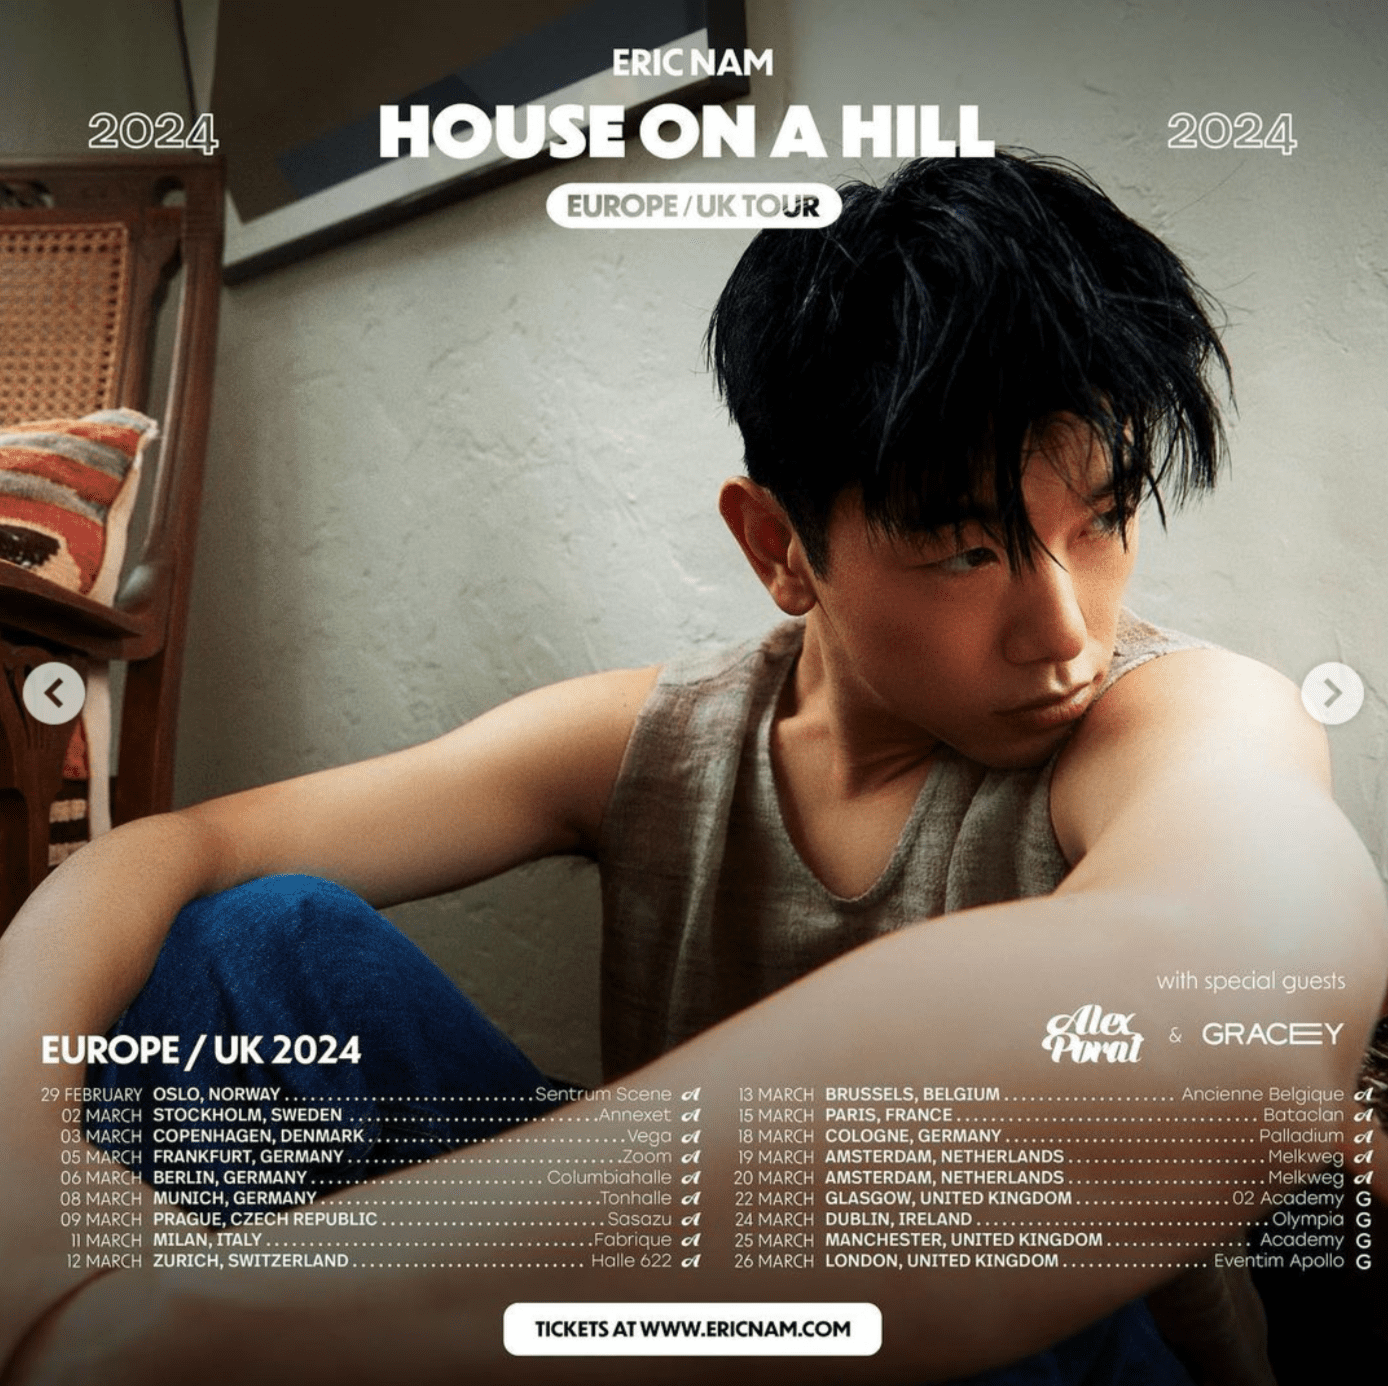 ERIC NAM - ‘HOUSE ON A HILL’ EUROPE/ UK TOUR 2024 Poster